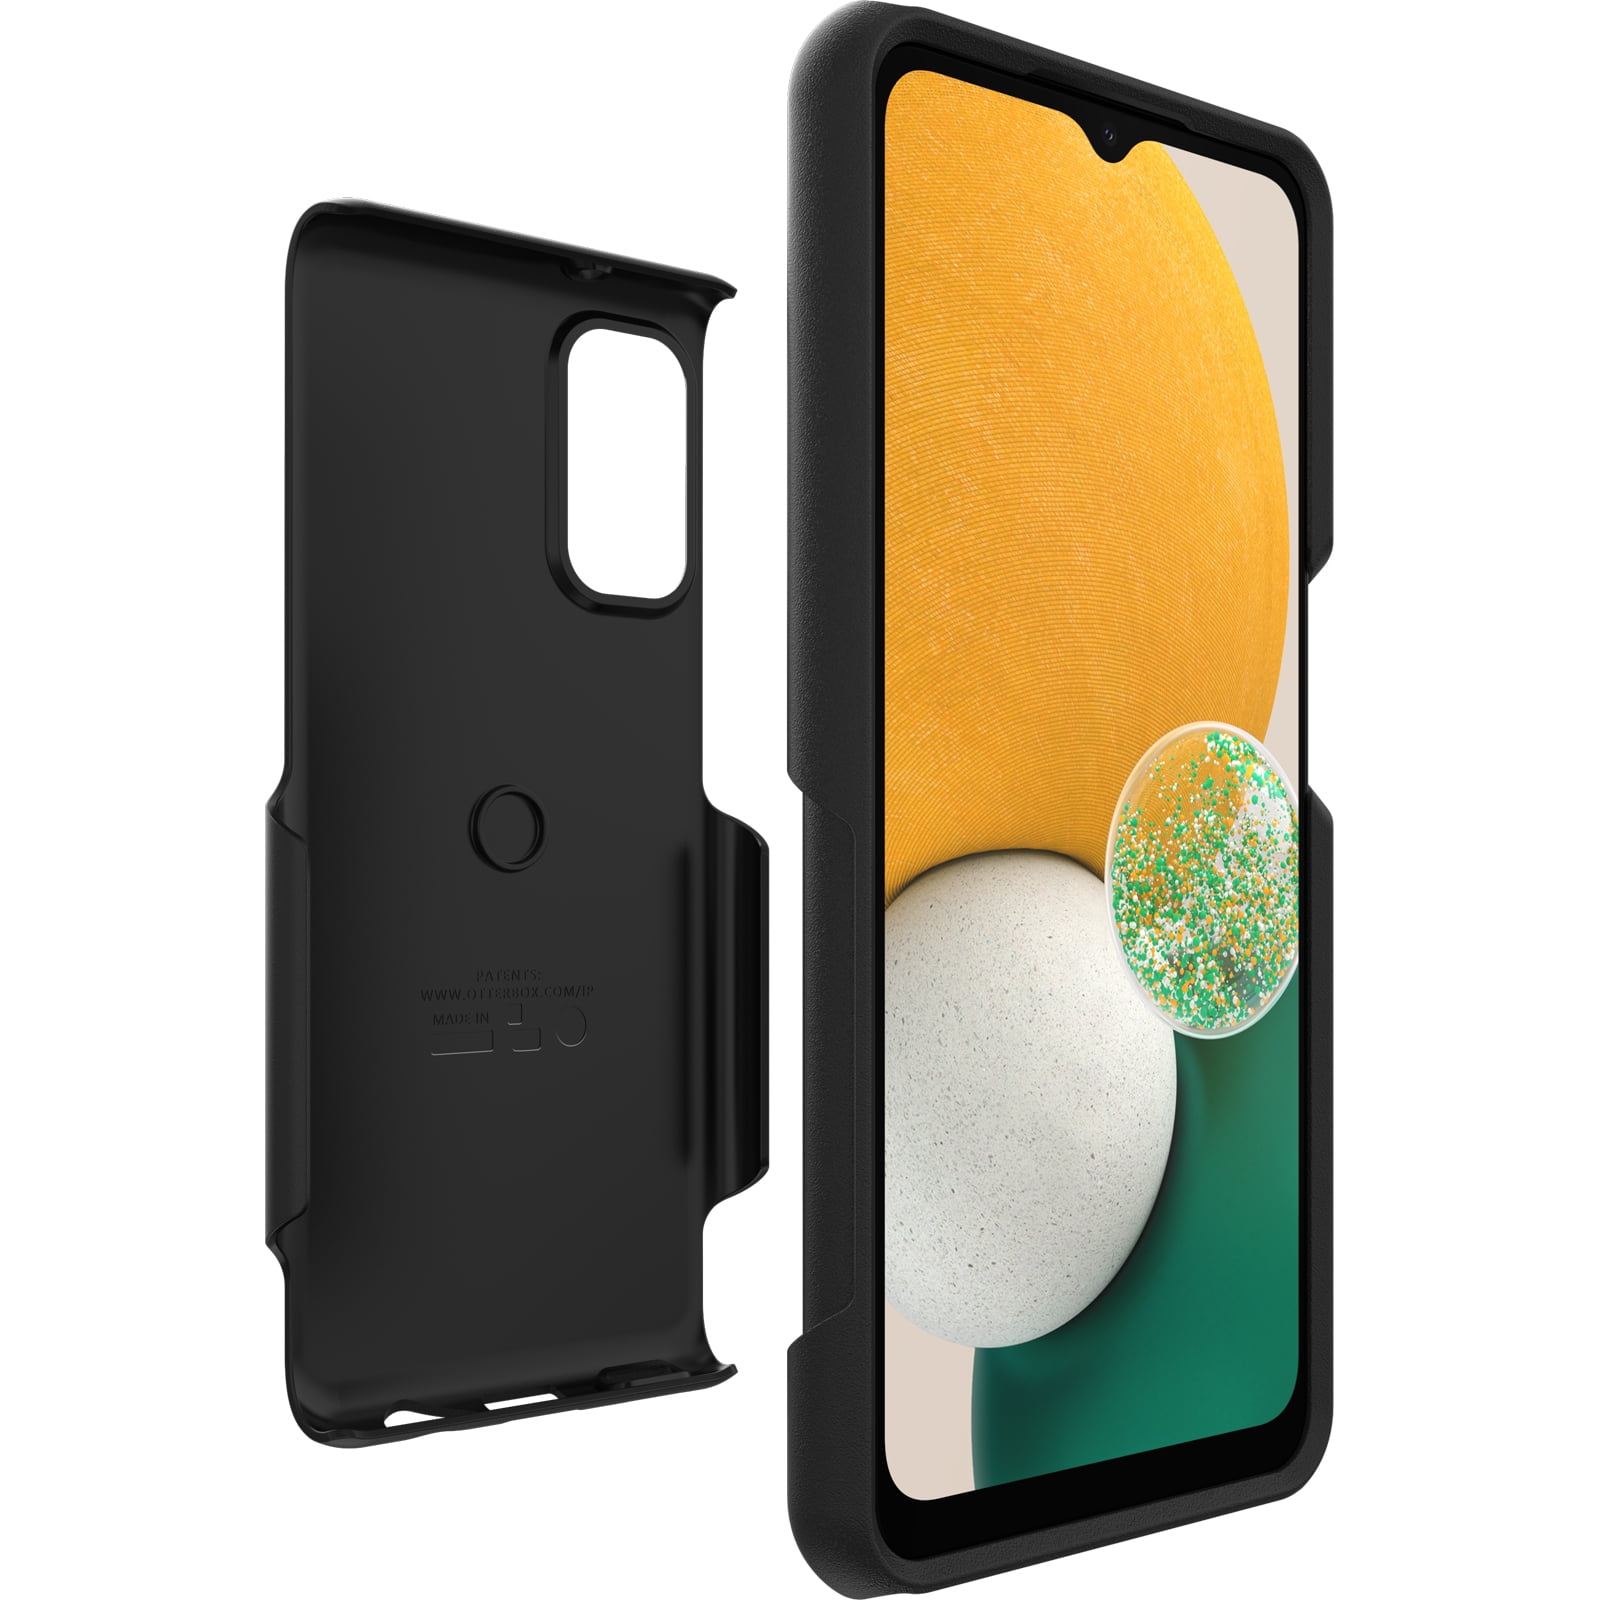 Buy OtterBox Commuter Series Lite Case for Samsung Galaxy A13 5G-Black  Online at Lowest Price in Ubuy Saint Helena, Ascension and Tristan da  Cunha. 609540227